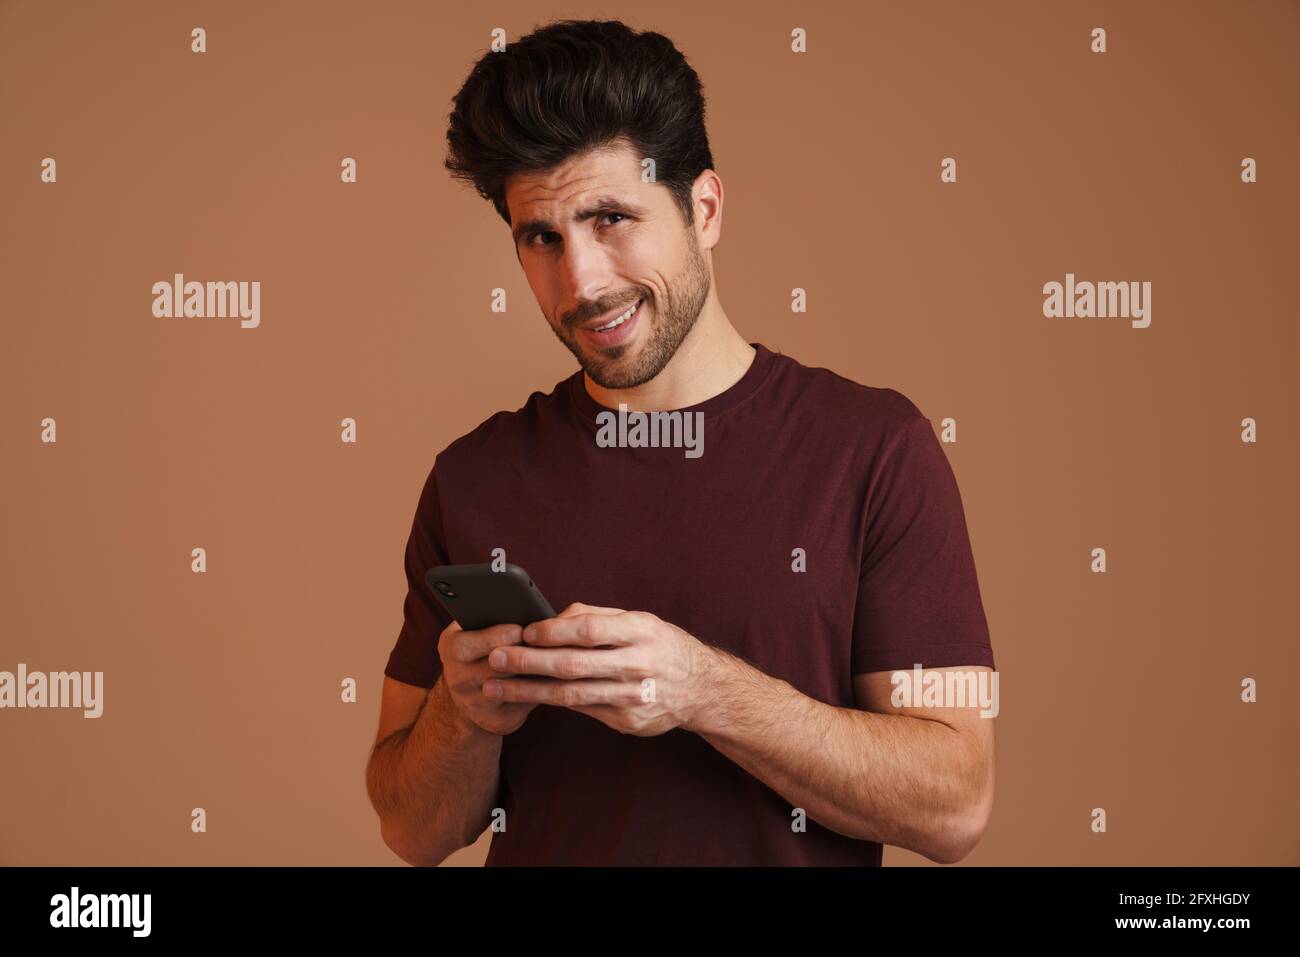 Pleased masculine man using mobile phone and smiling isolated over beige background Stock Photo